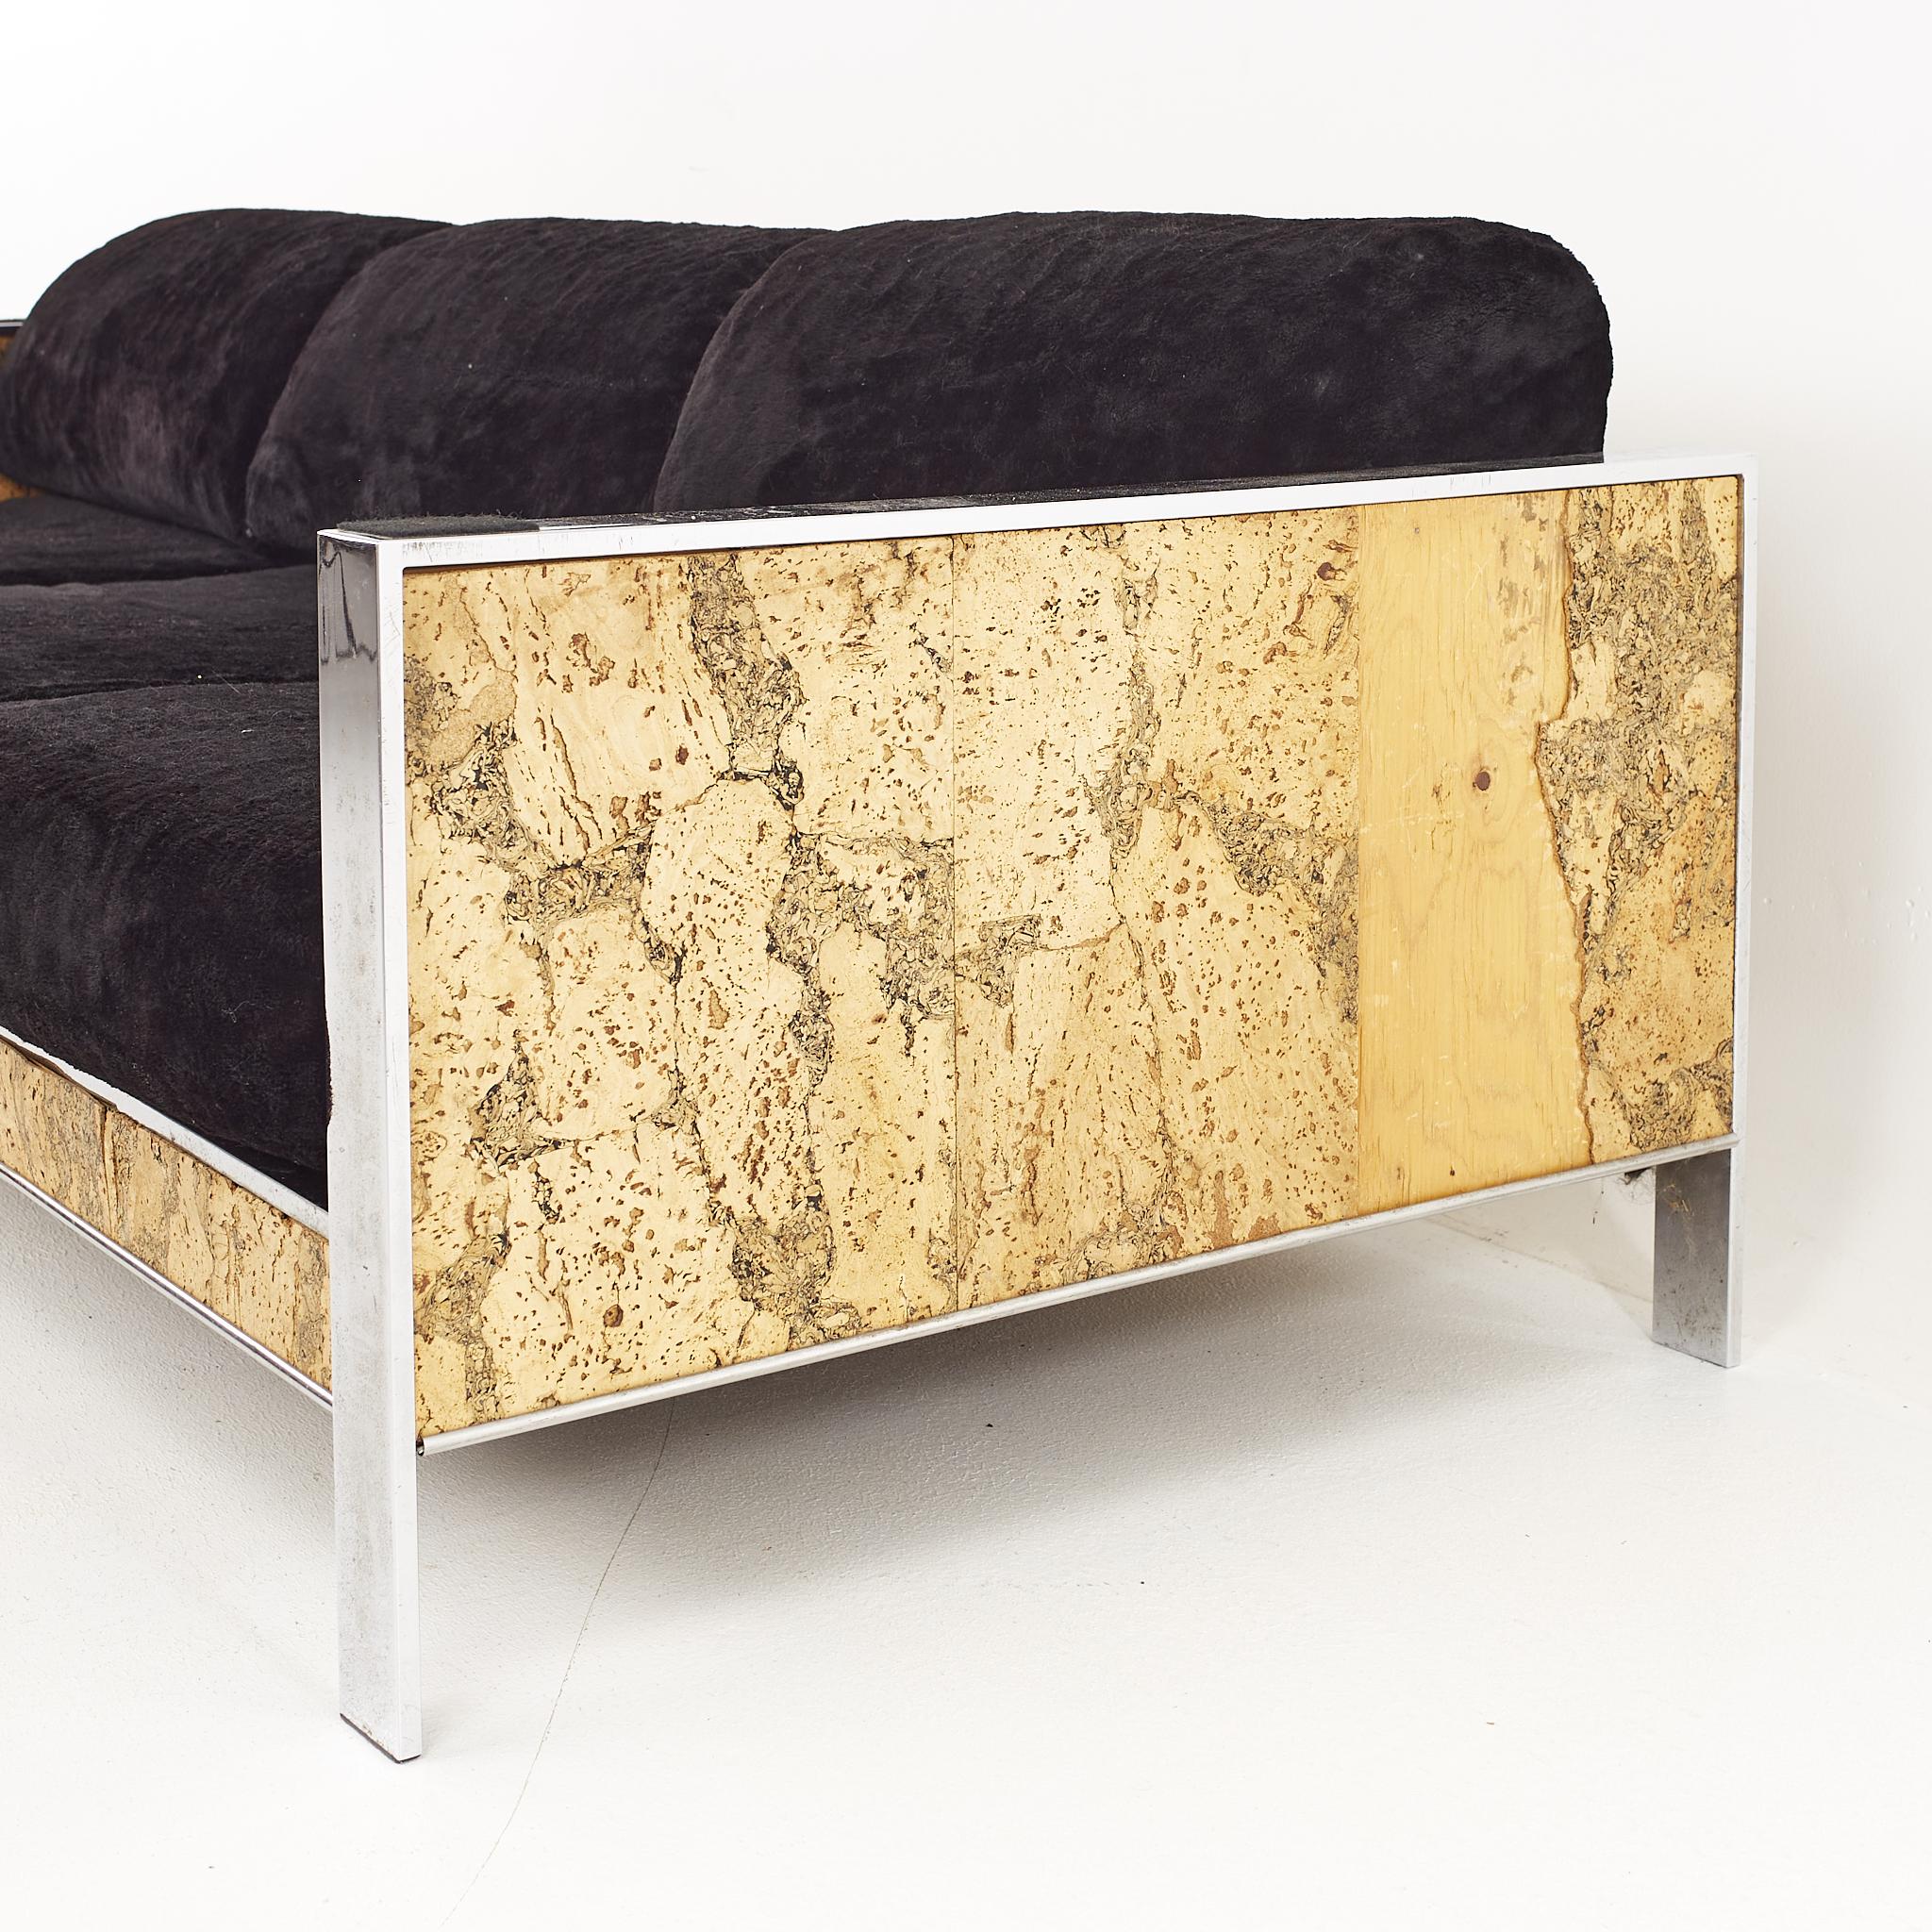 American Adrian Pearsall for Craft Associates Mid Century Cork and Chrome Sofa For Sale